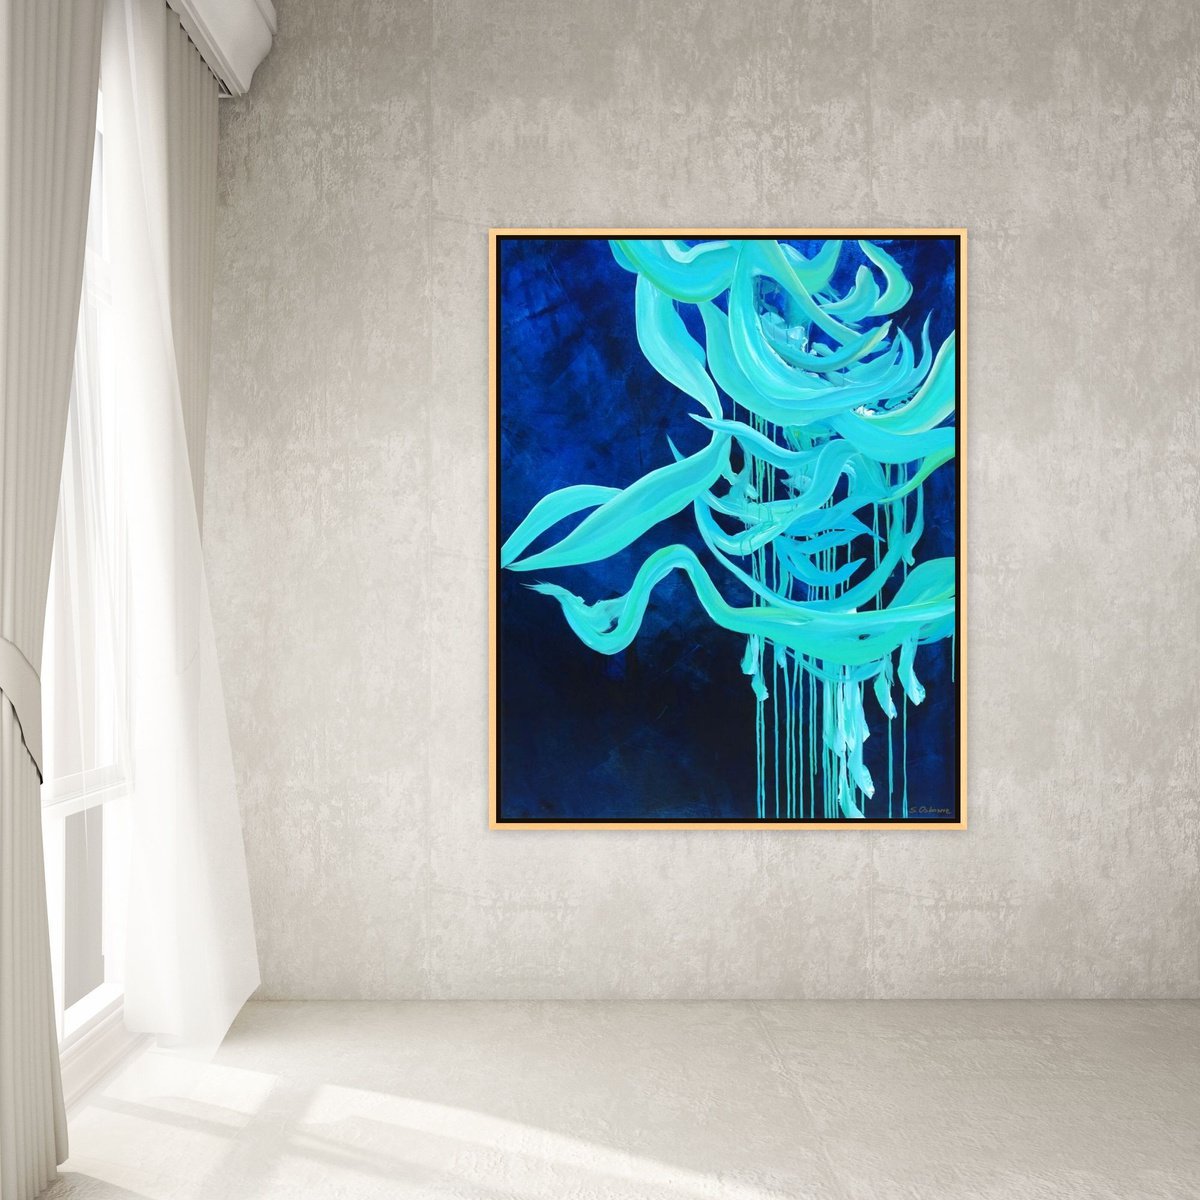 Large Blue Abstract Teal Turquoise Painting on Canvas. Bold Modern Art with Brush Strokes... by Sveta Osborne